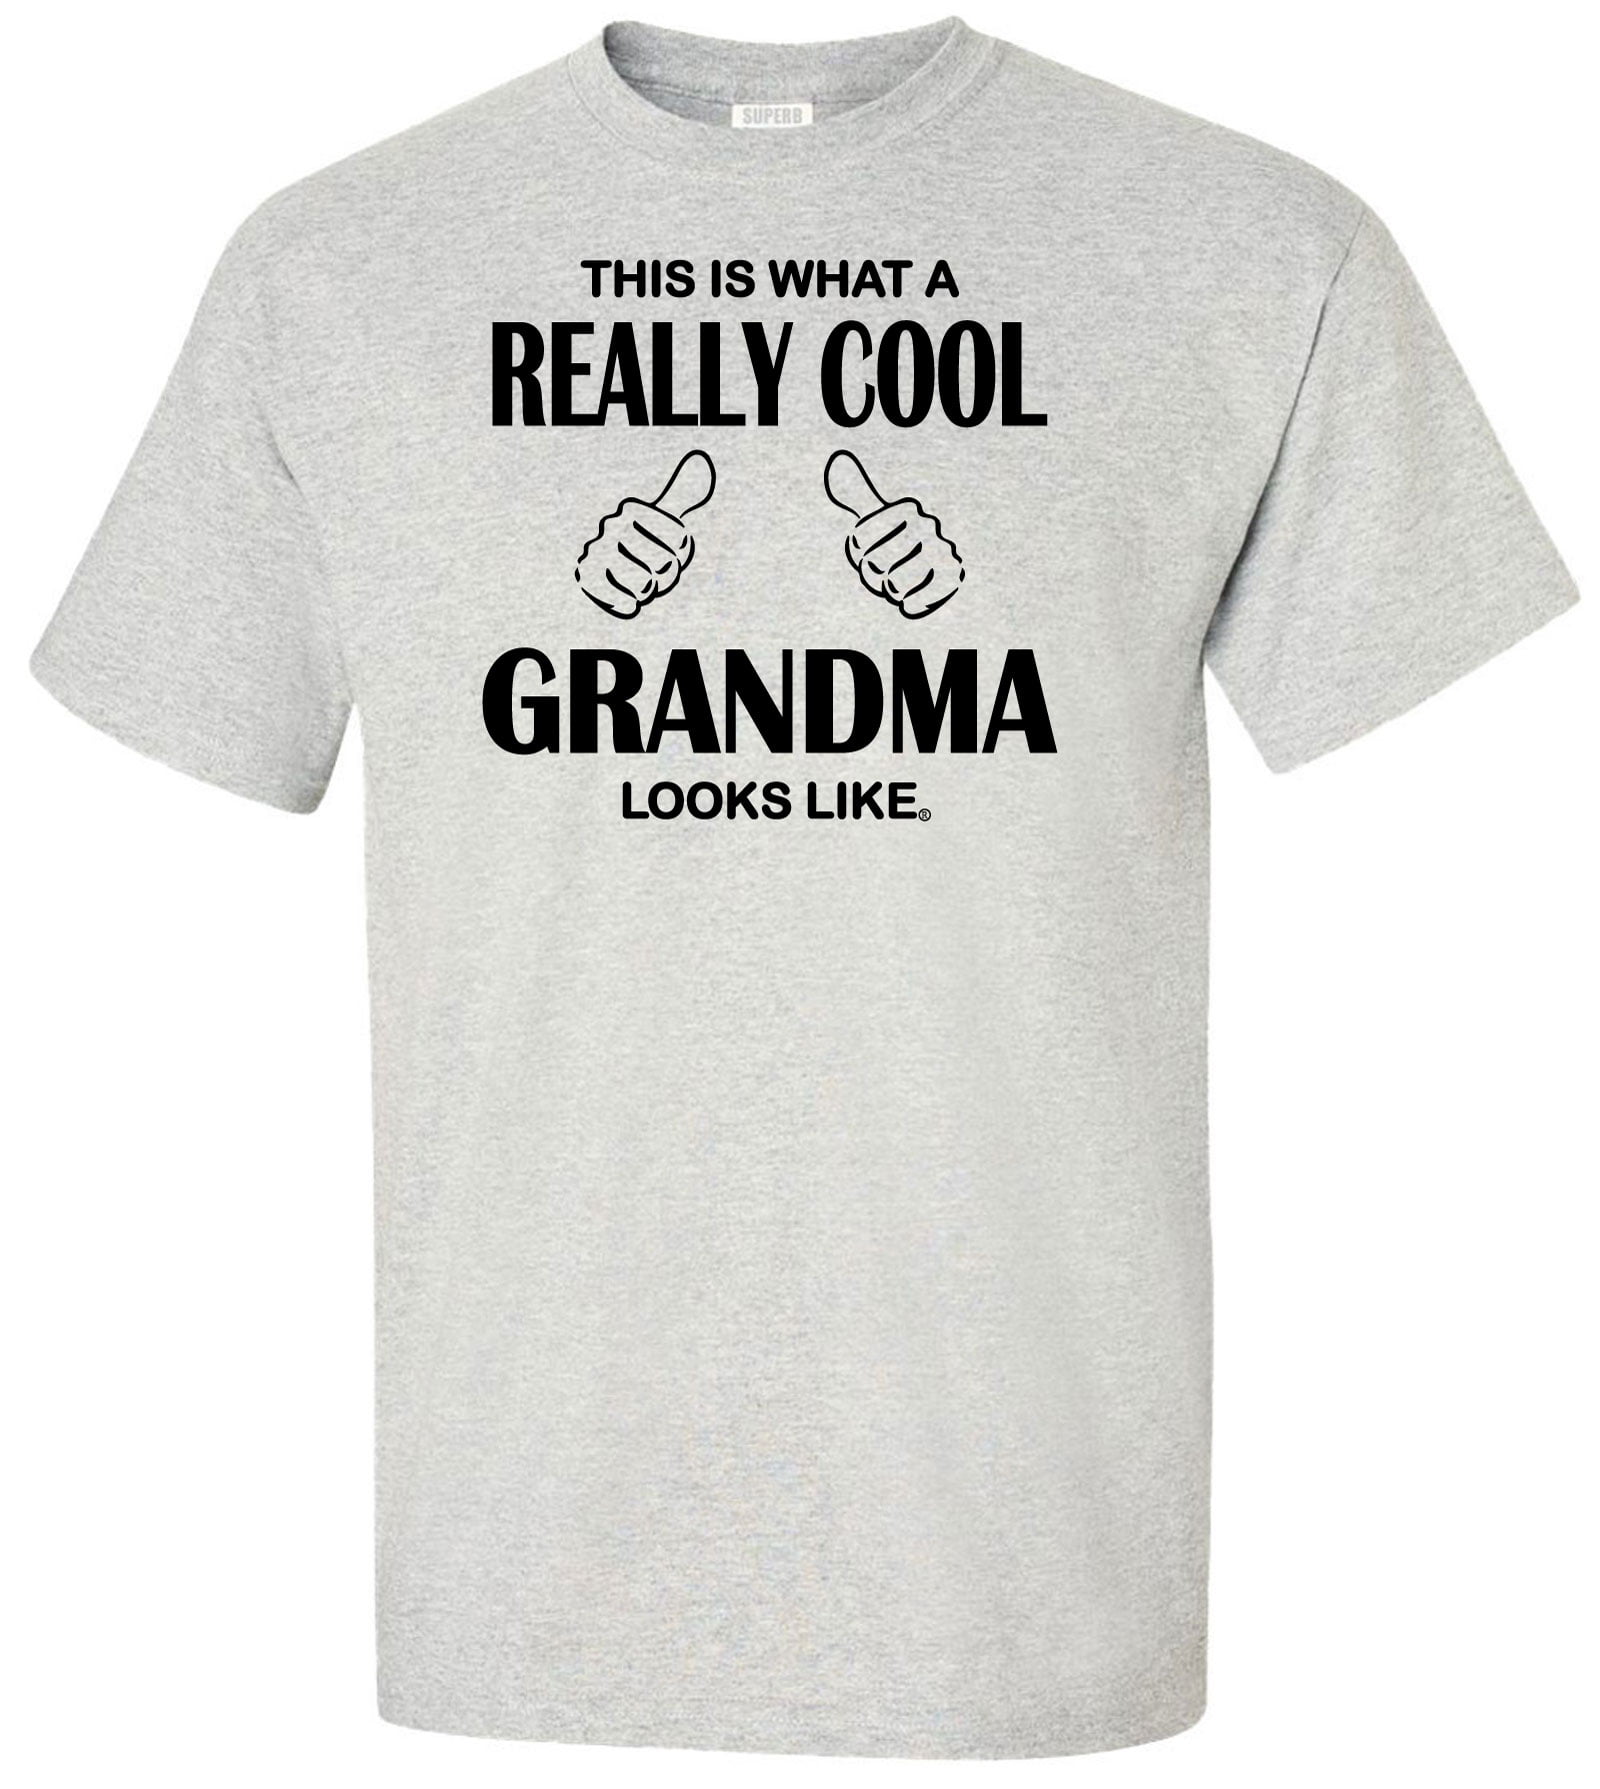 This Is What A Really Cool Grandma Looks Like Funny Adult T Shirt 